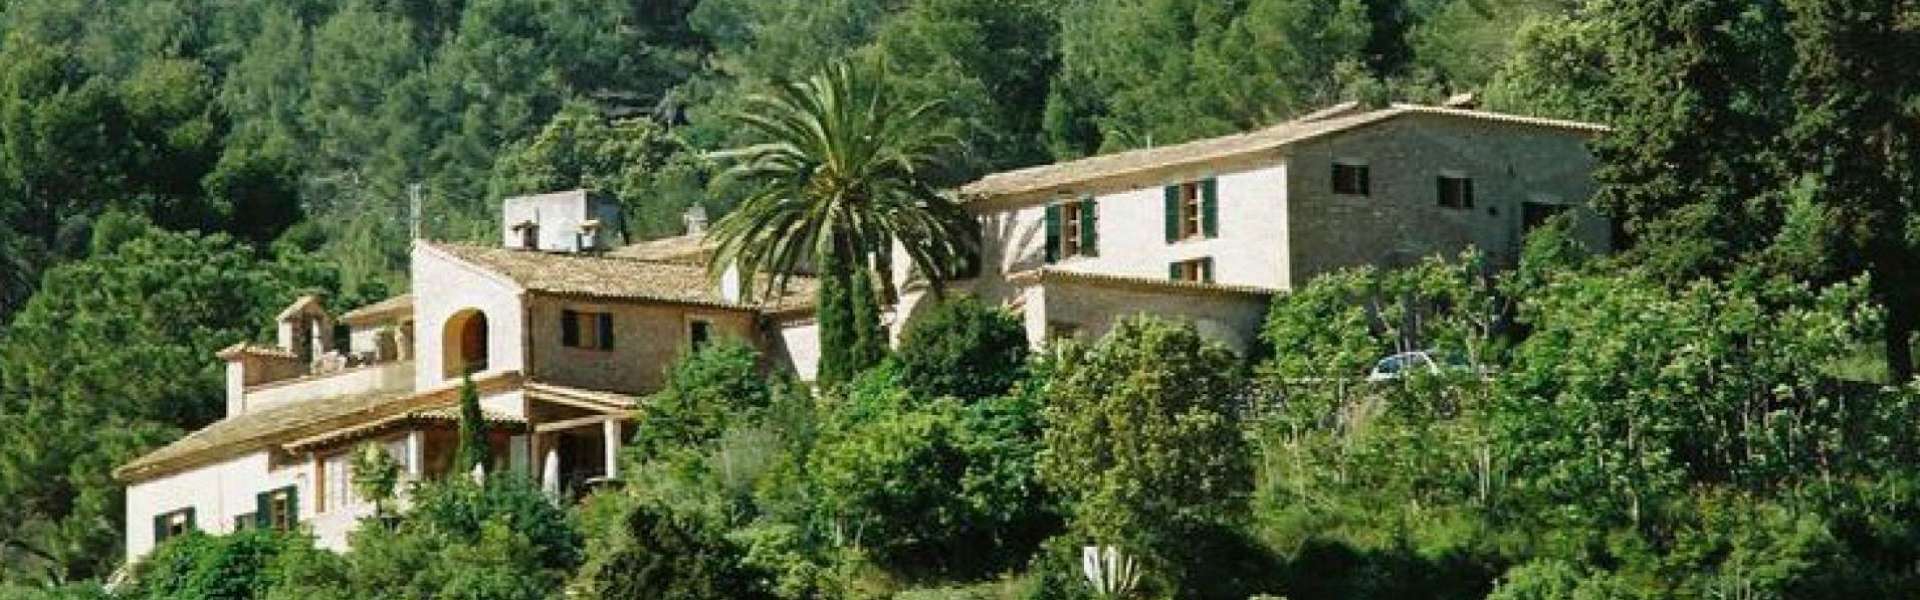 Esporles - Mansion / Rustic Hotel - a property with a variety of possible uses